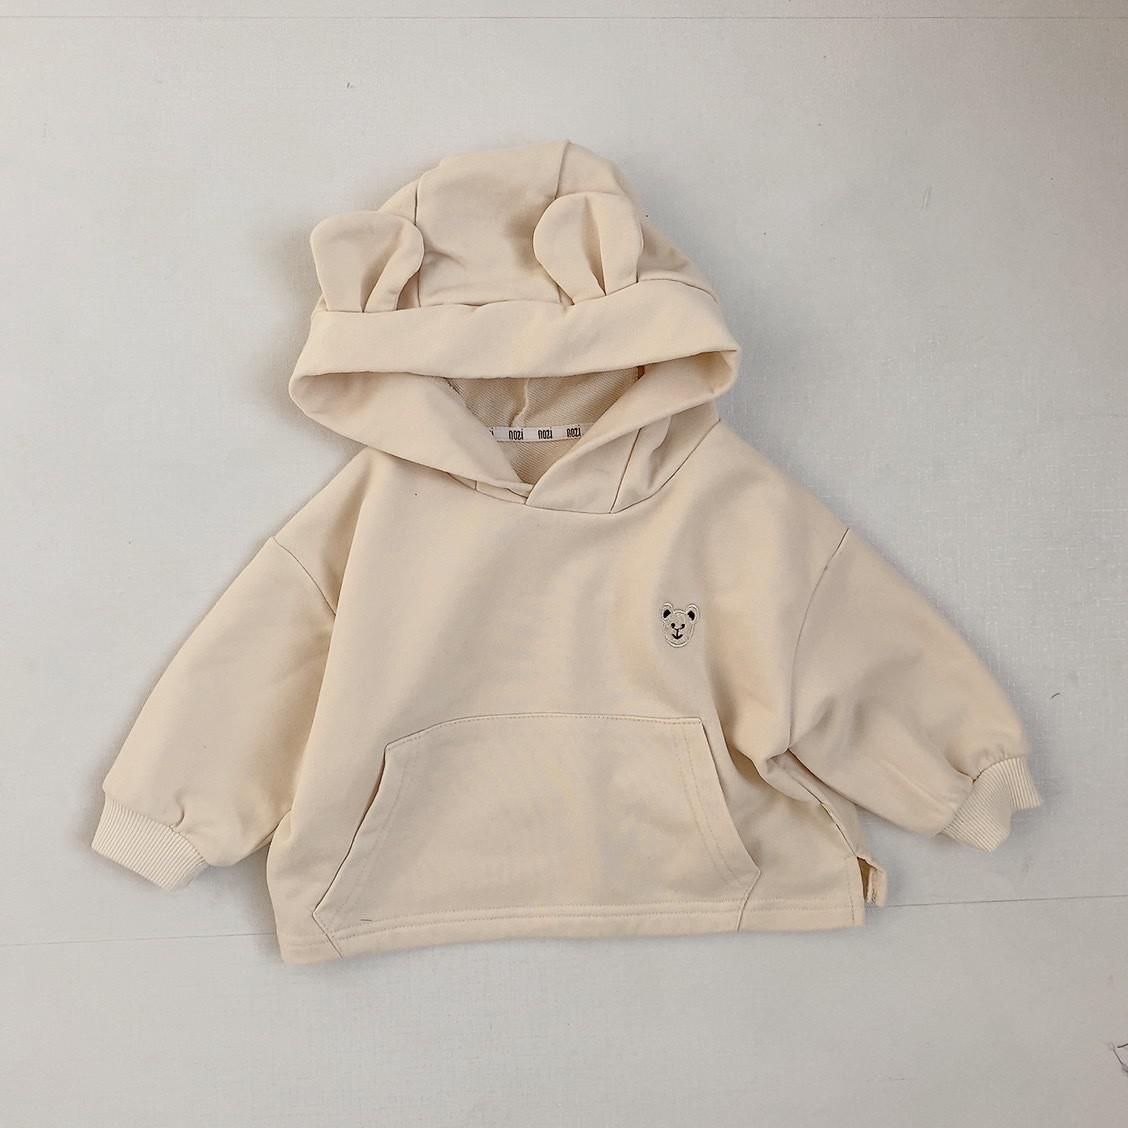 Hooded Sweatshirt Toddler Girls Cotton Clothes Embroidery Tops Kids Hoodies Outwear - BTBH2122